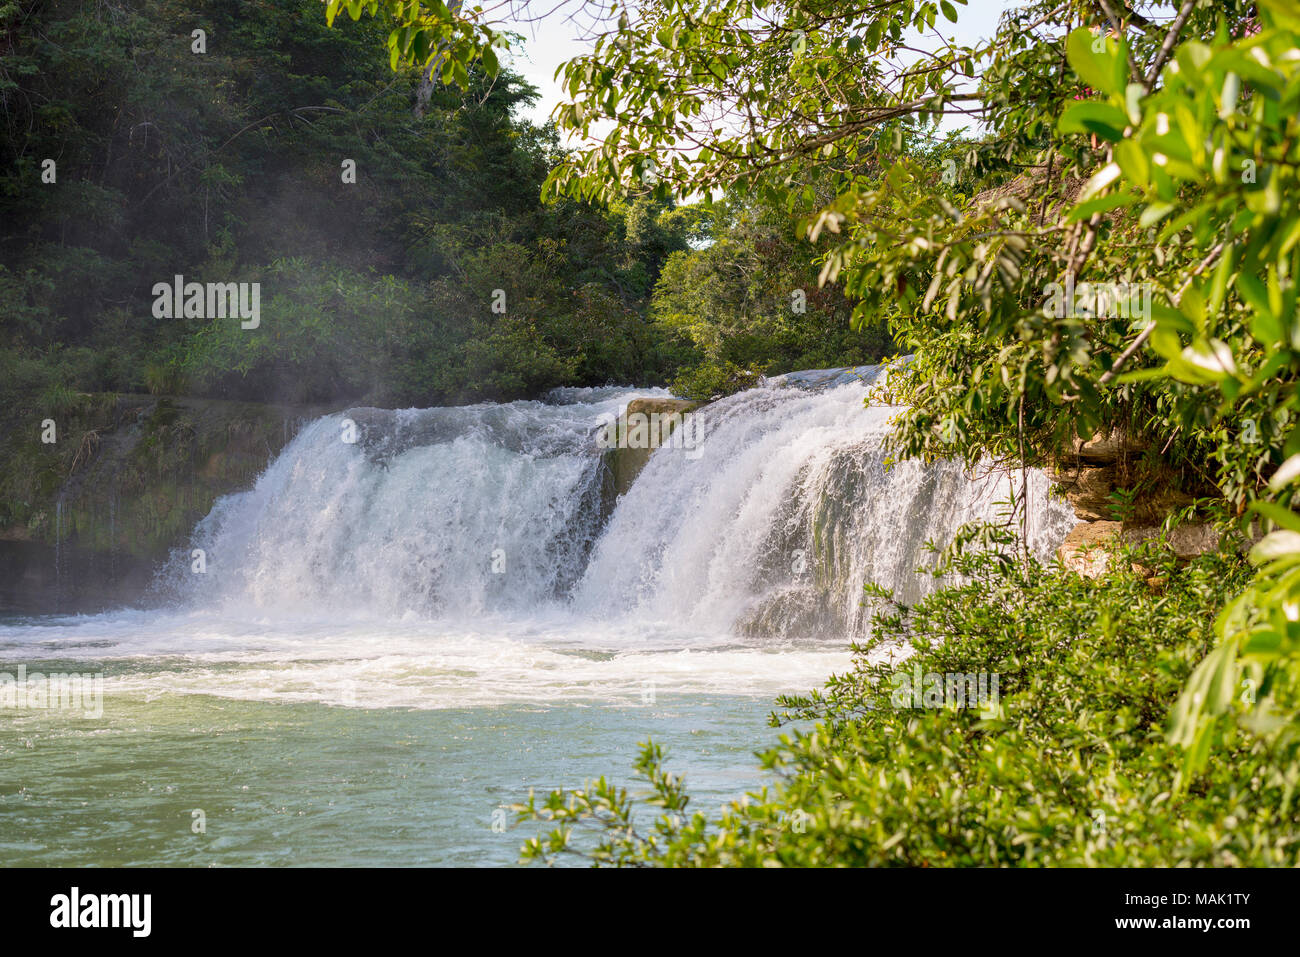 Natural waterfall in Rio Blanco National Park in Toledo Belize Stock Photo